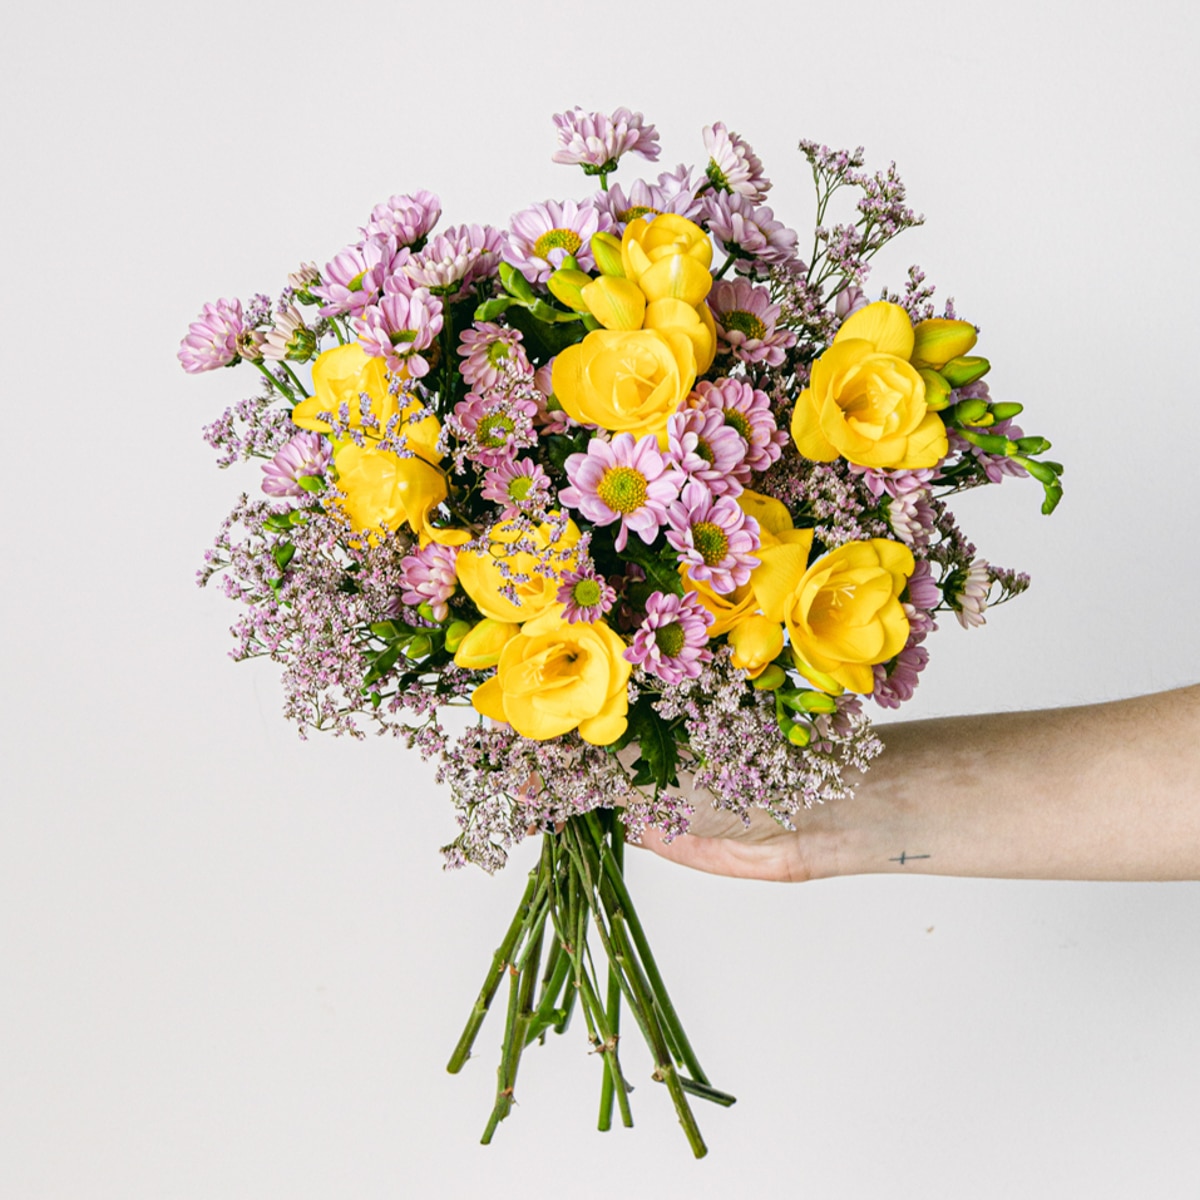 Bouquet of yellow freesias and pink limonium flowers with vase